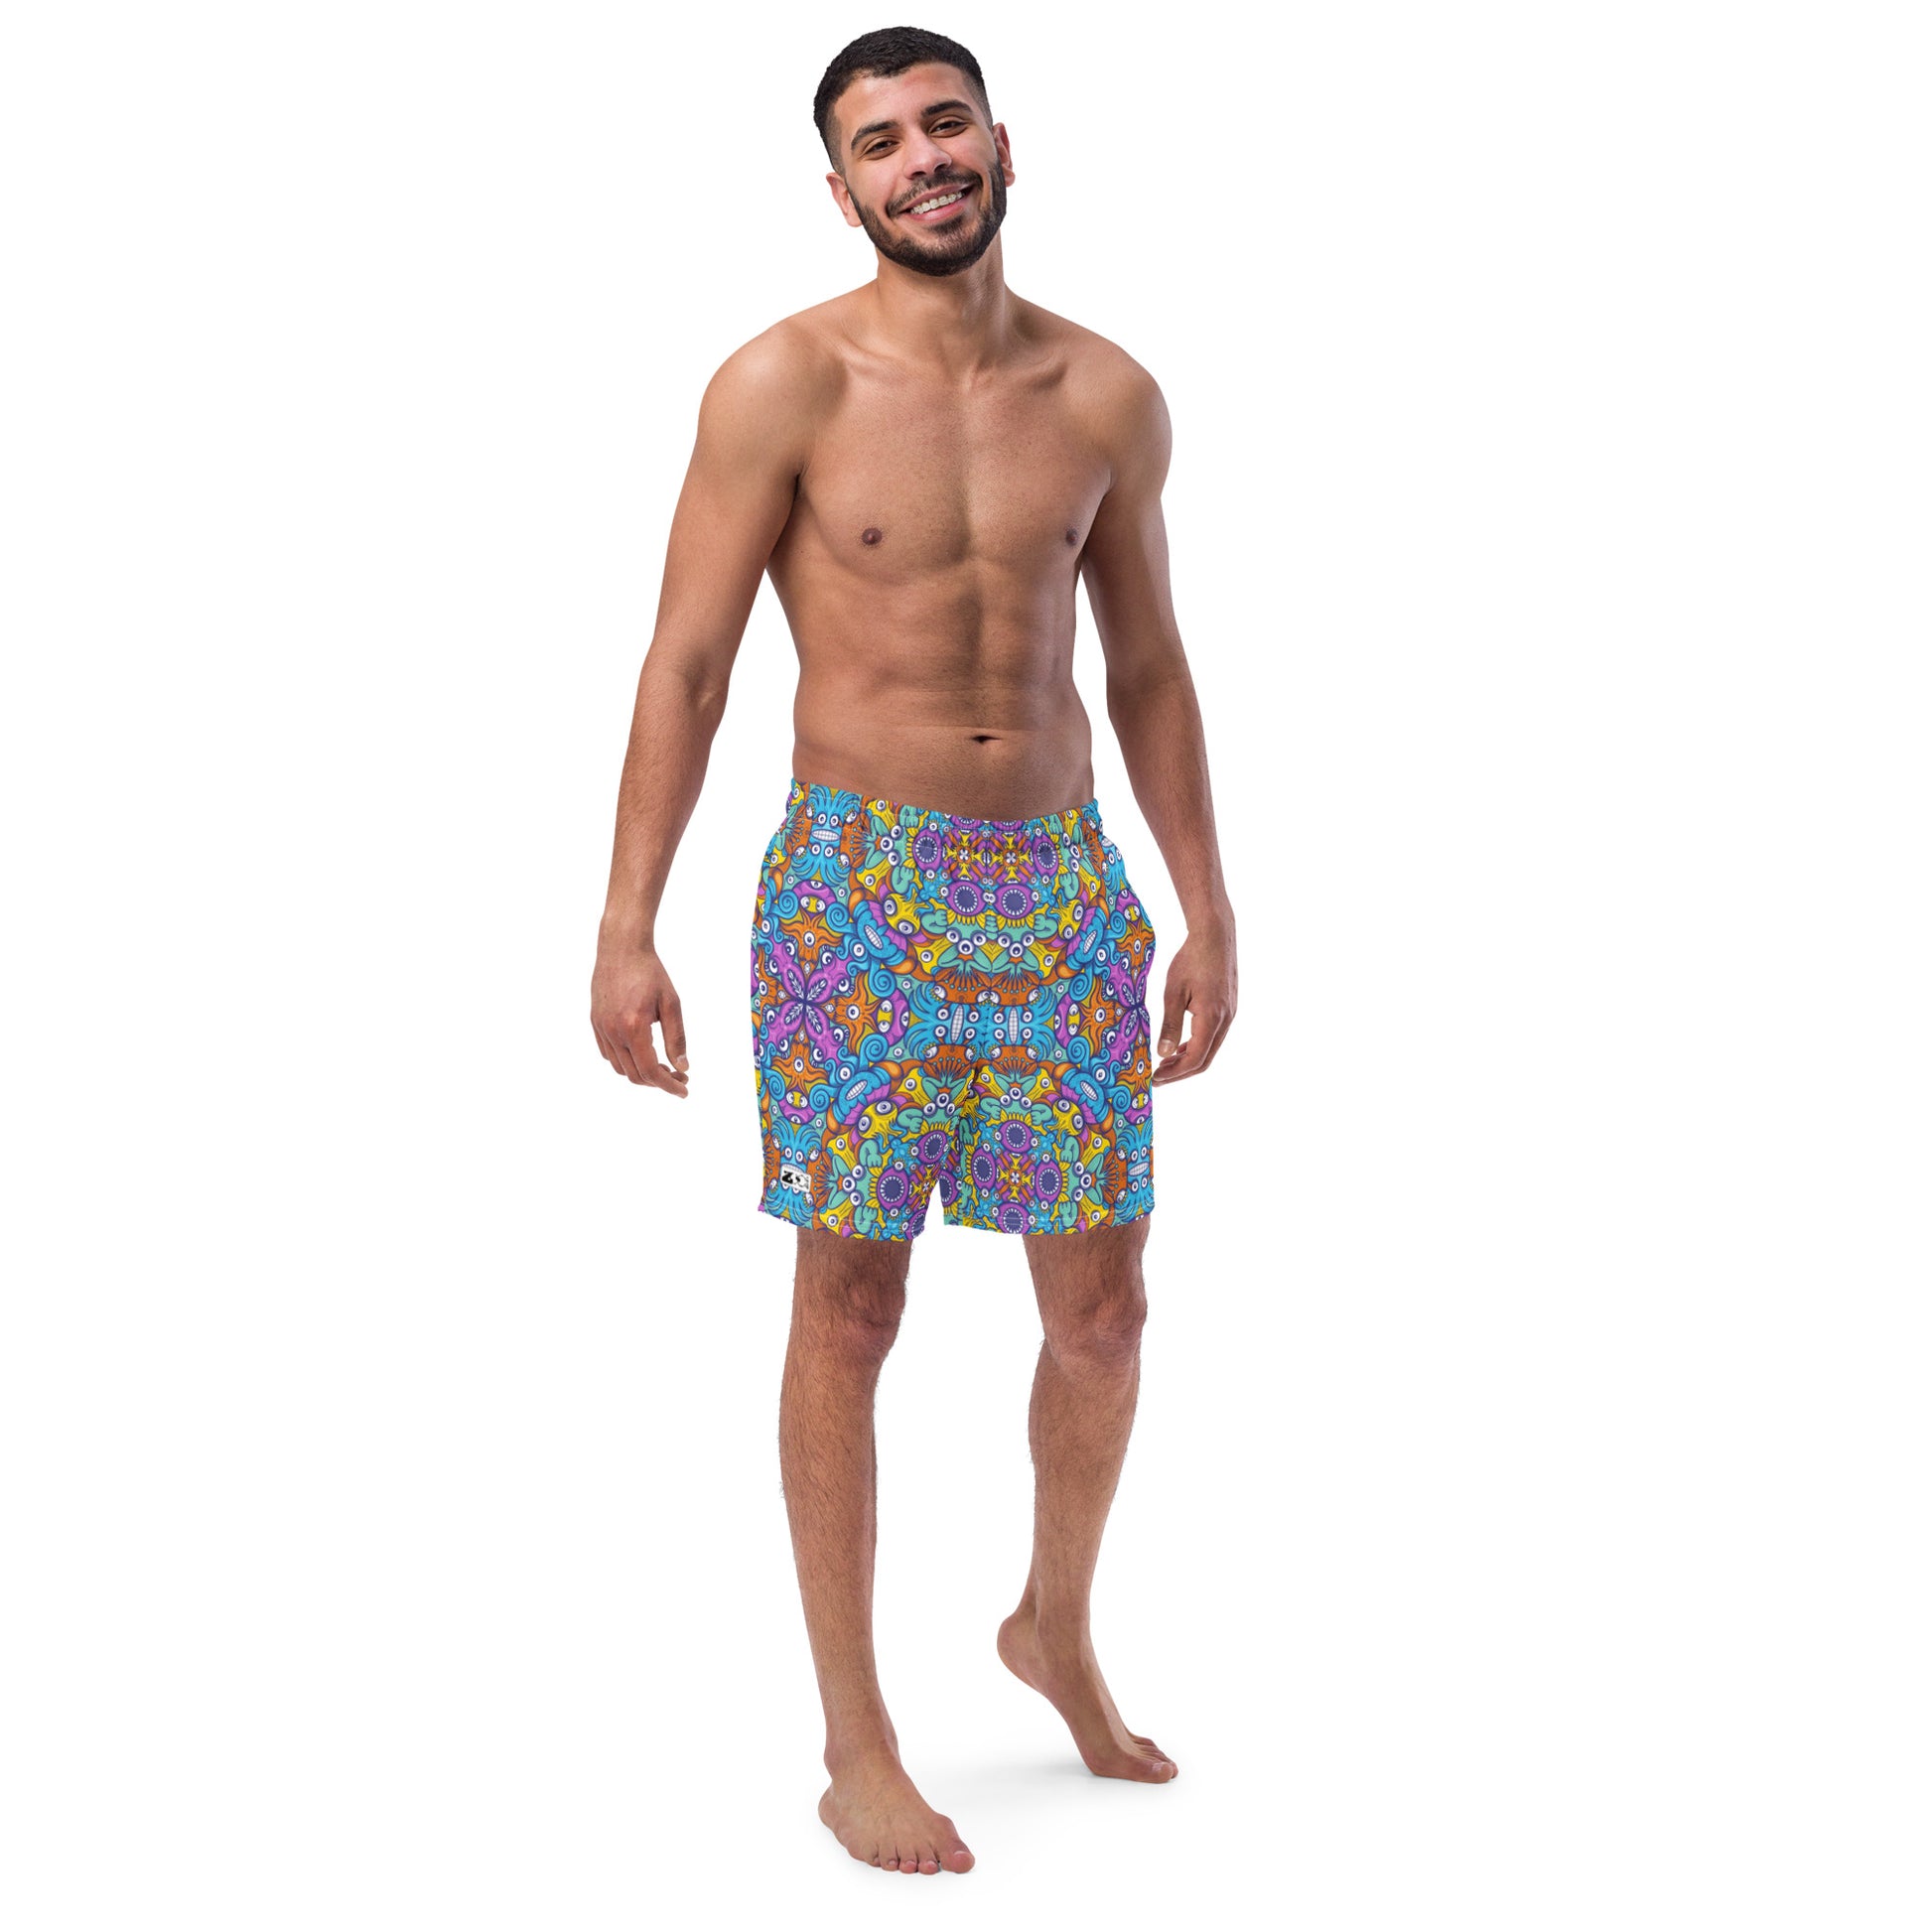 The ultimate sea beasts cast from the deep end of the ocean Men's swim trunks. Lifestyle